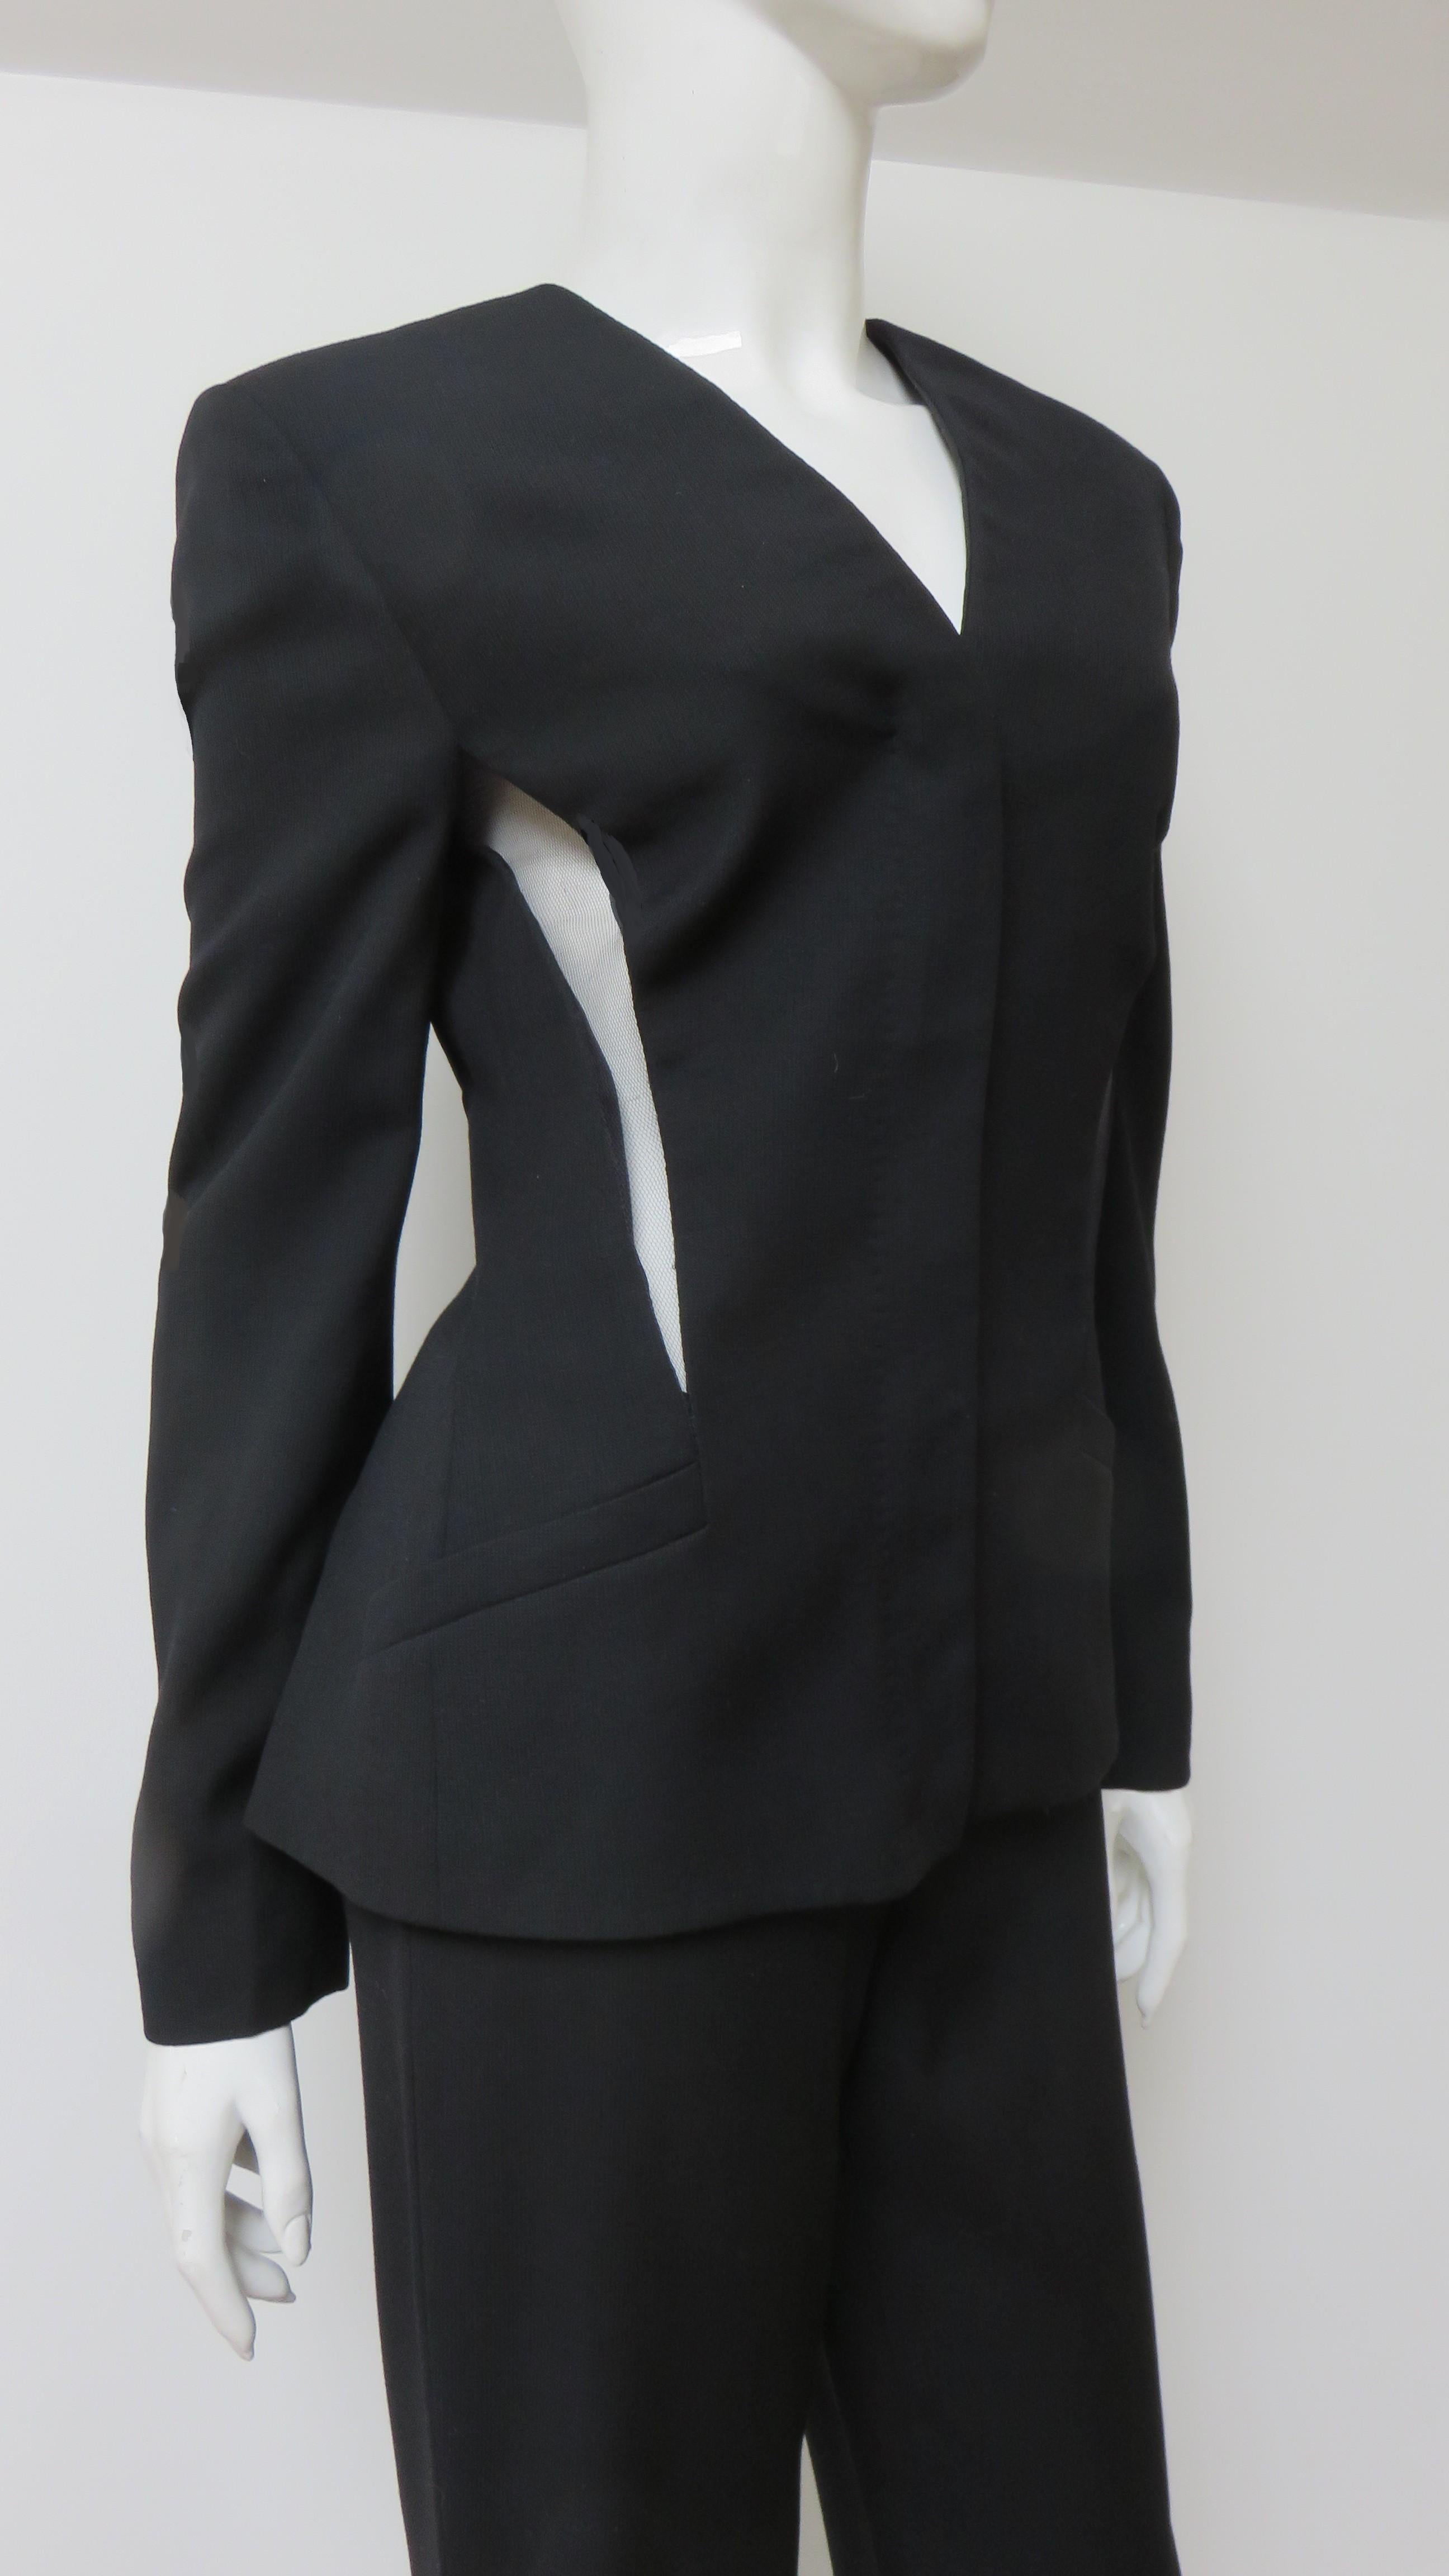 Gianni Versace Couture Silk Pant Suit with Cut outs 1990s In Good Condition For Sale In Water Mill, NY